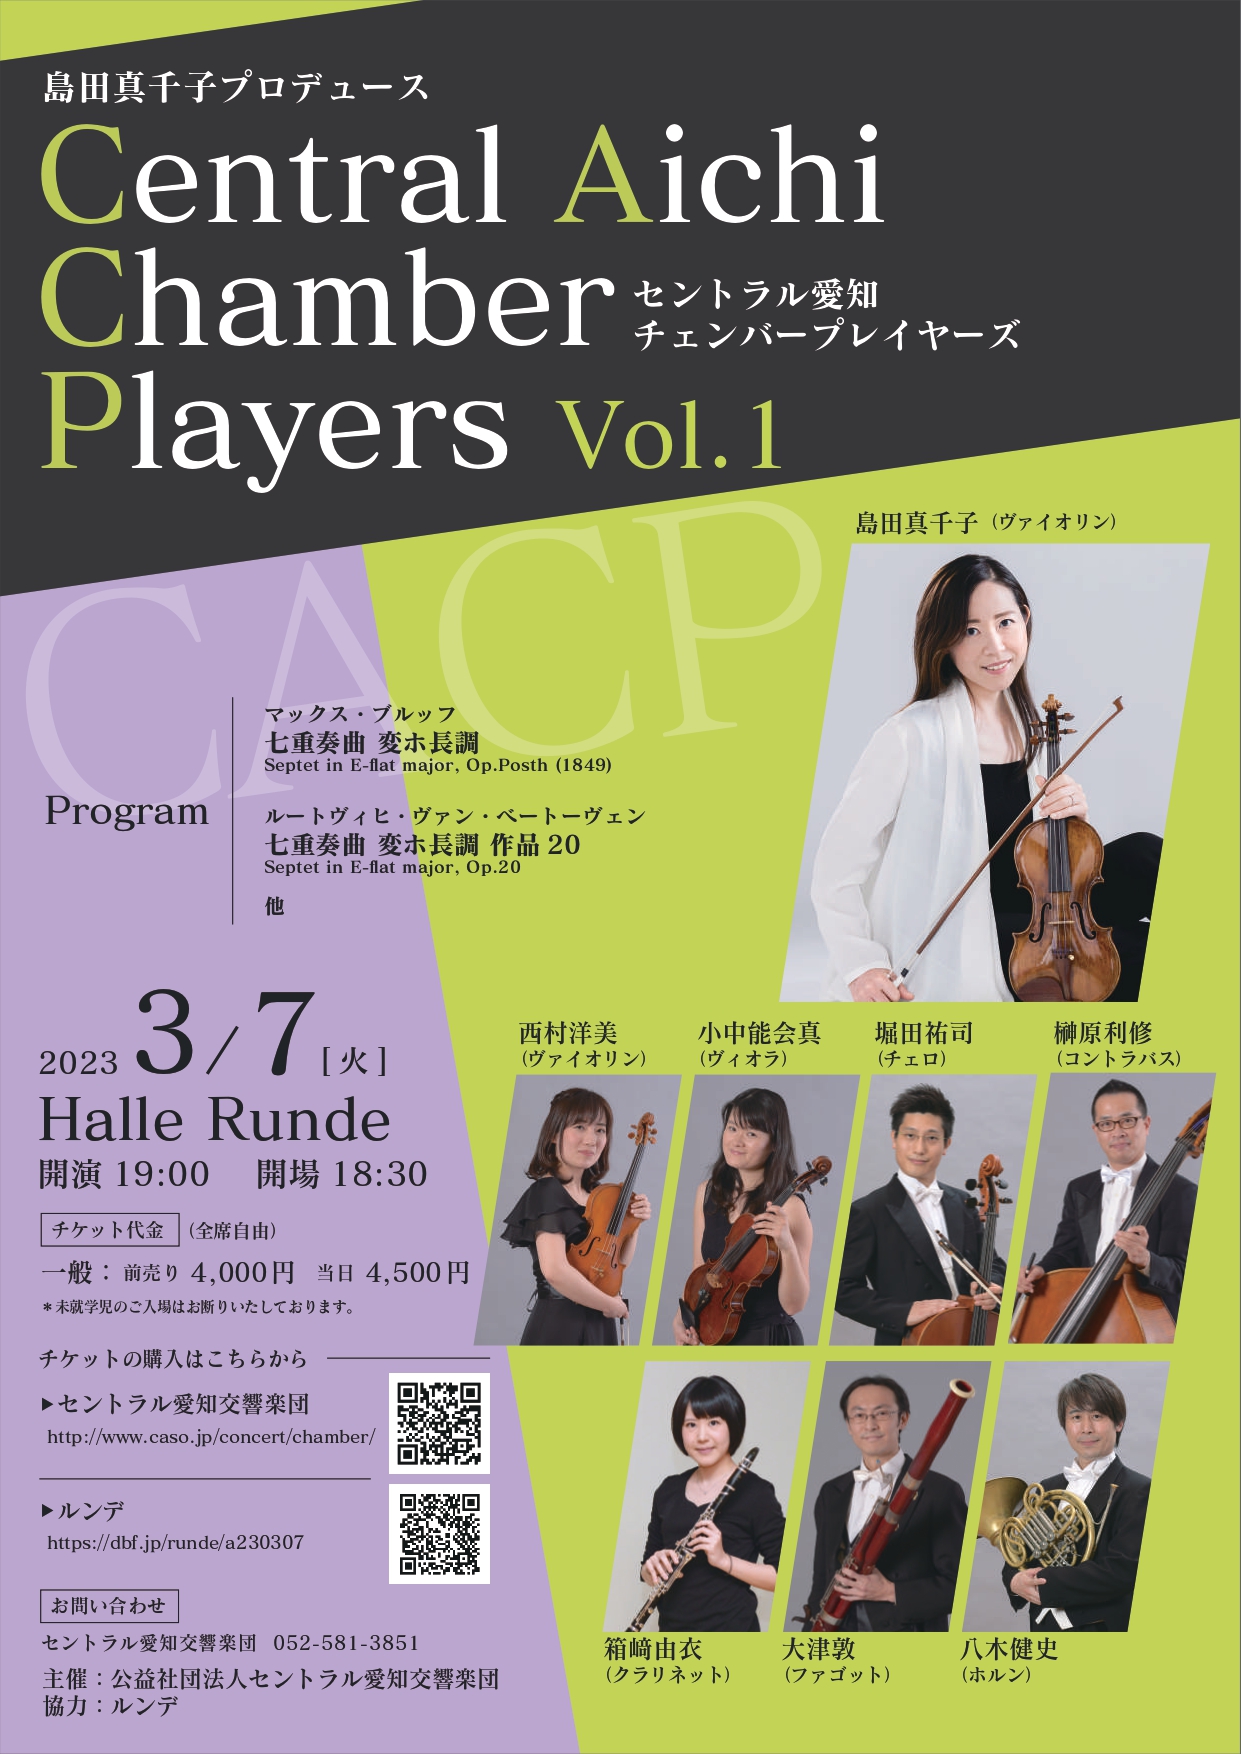 Central Aichi Chamber Players Vol.1